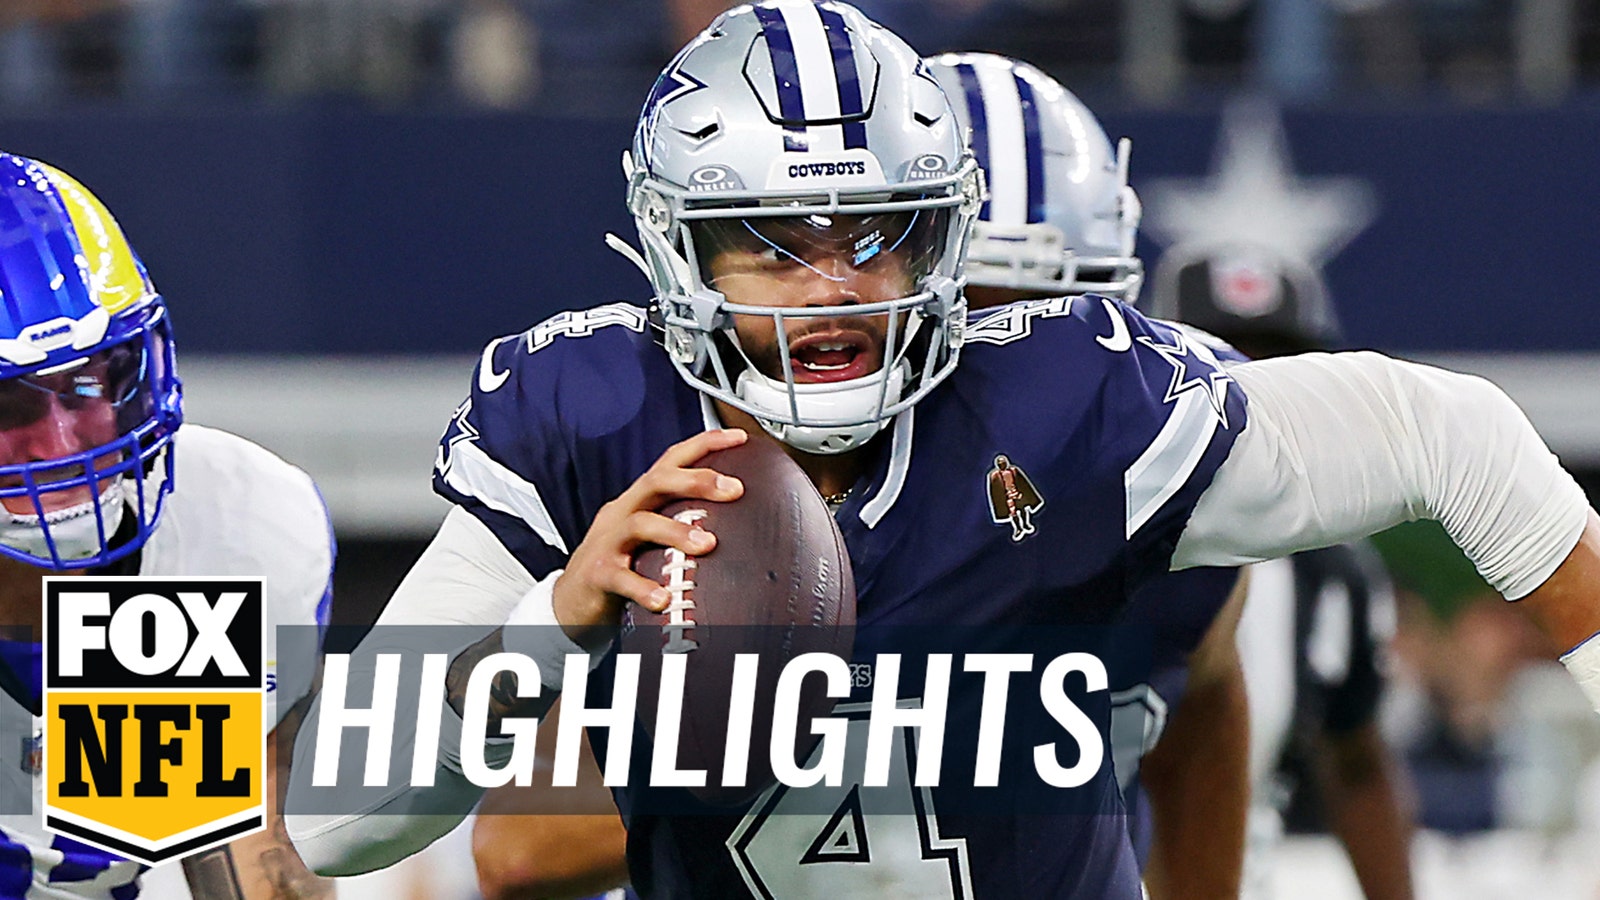 Dak Prescott throws for 304 yards and four touchdowns in blowout win vs. Rams 